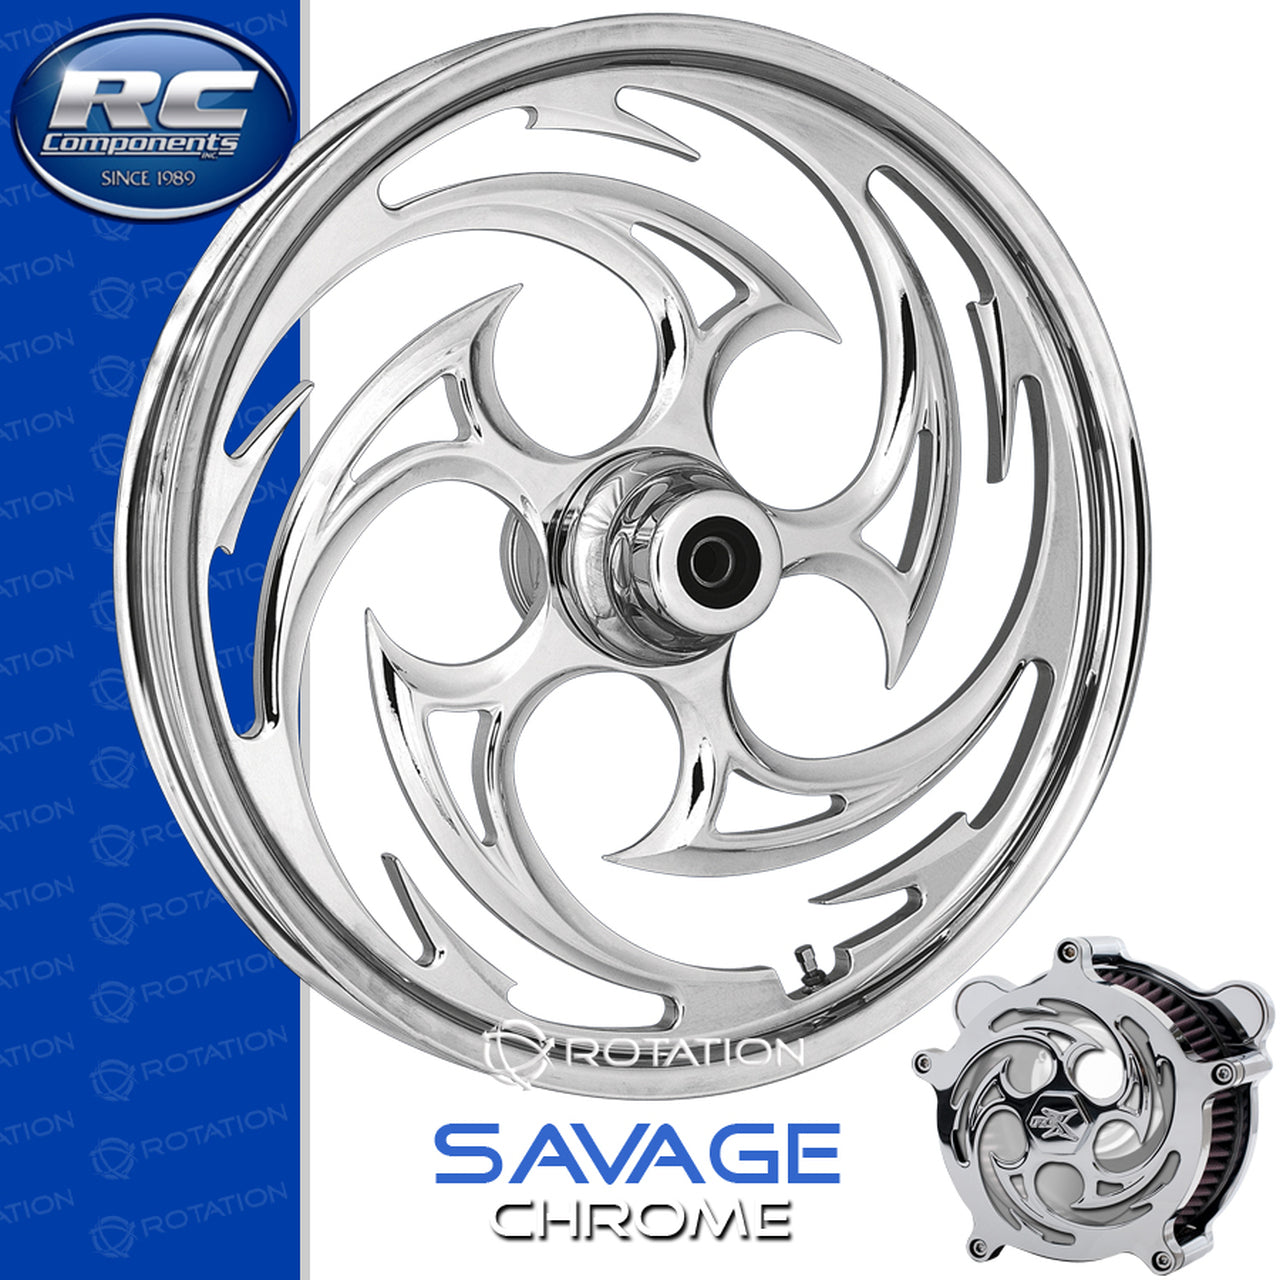 RC Components Savage Chrome Touring Wheel